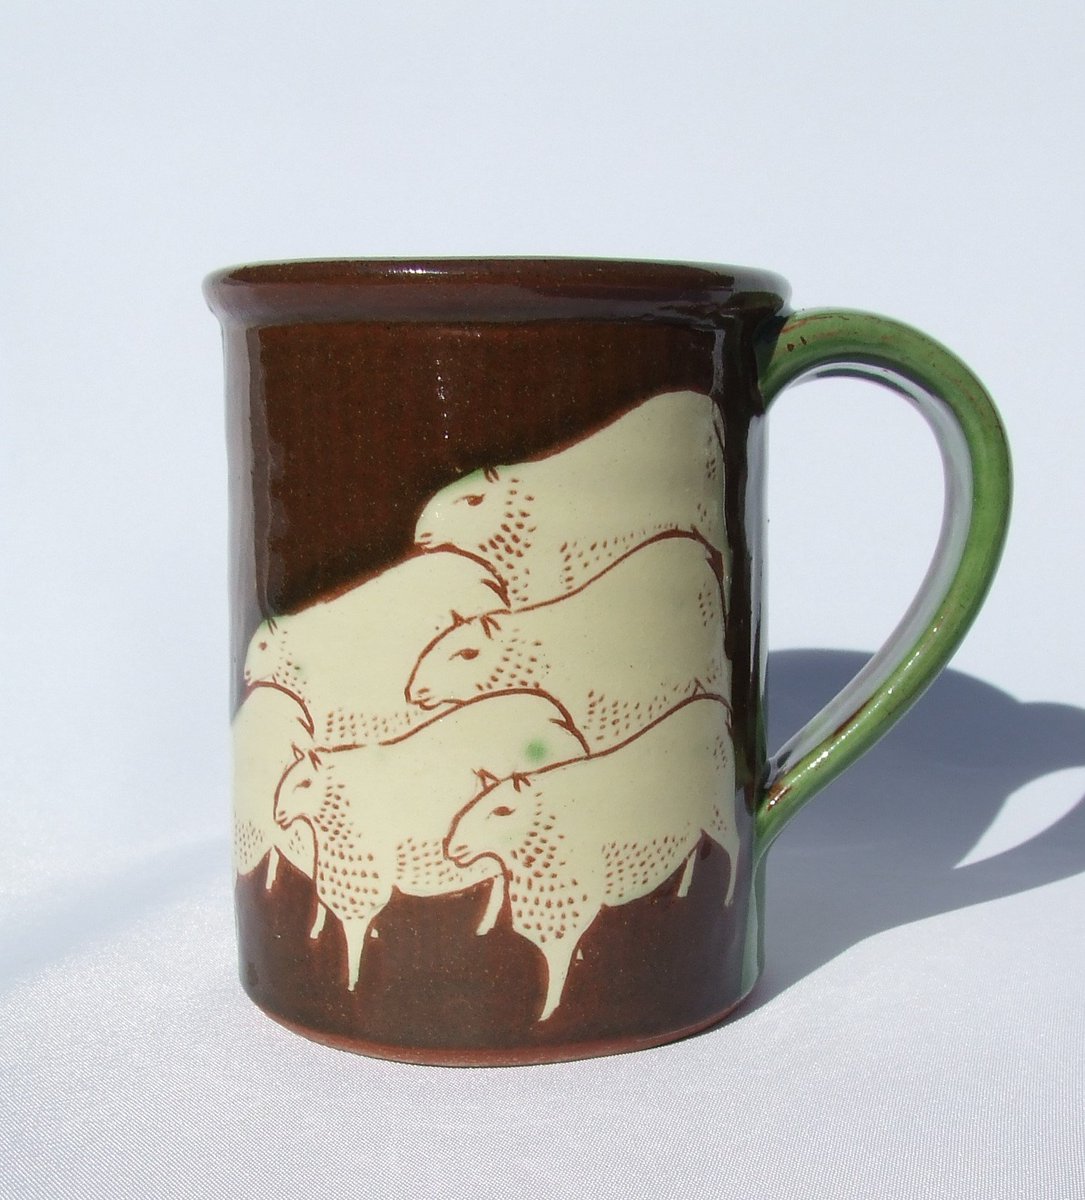 Excited to share the latest addition to my #etsy shop: Vintage Studio Pottery North Country Cheviot Sheep Society Slipware Mug D.1983 Limited Edition 40/100 Initialled T.S.W. Sgraffito Carved etsy.me/2MuwFdw #art #studiopottery #britishartpottery #ceramics #che